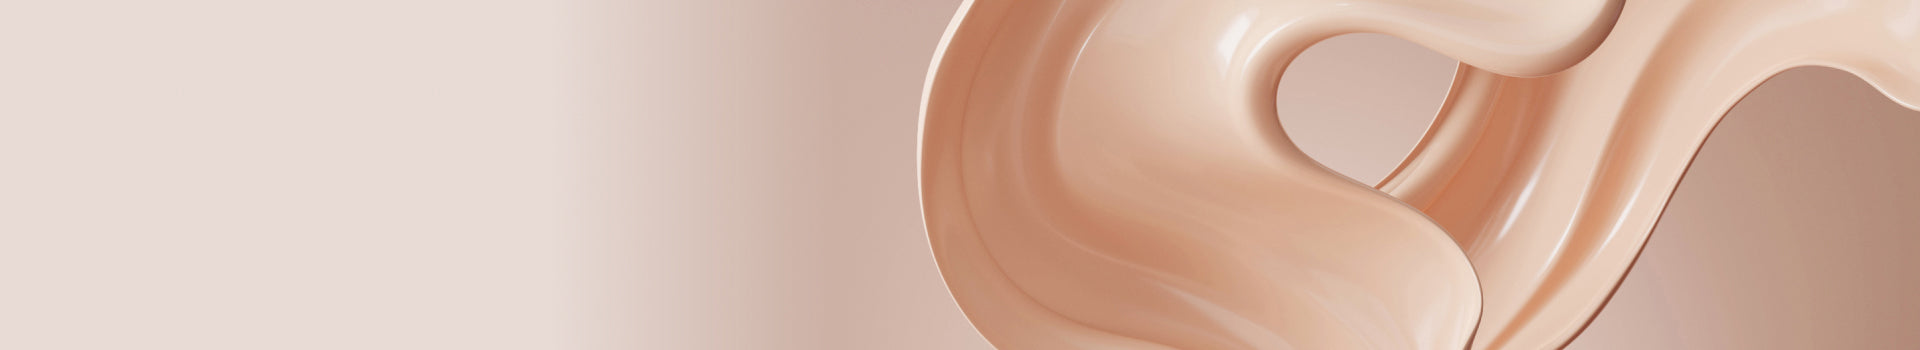 Creamy peach colored product spread out